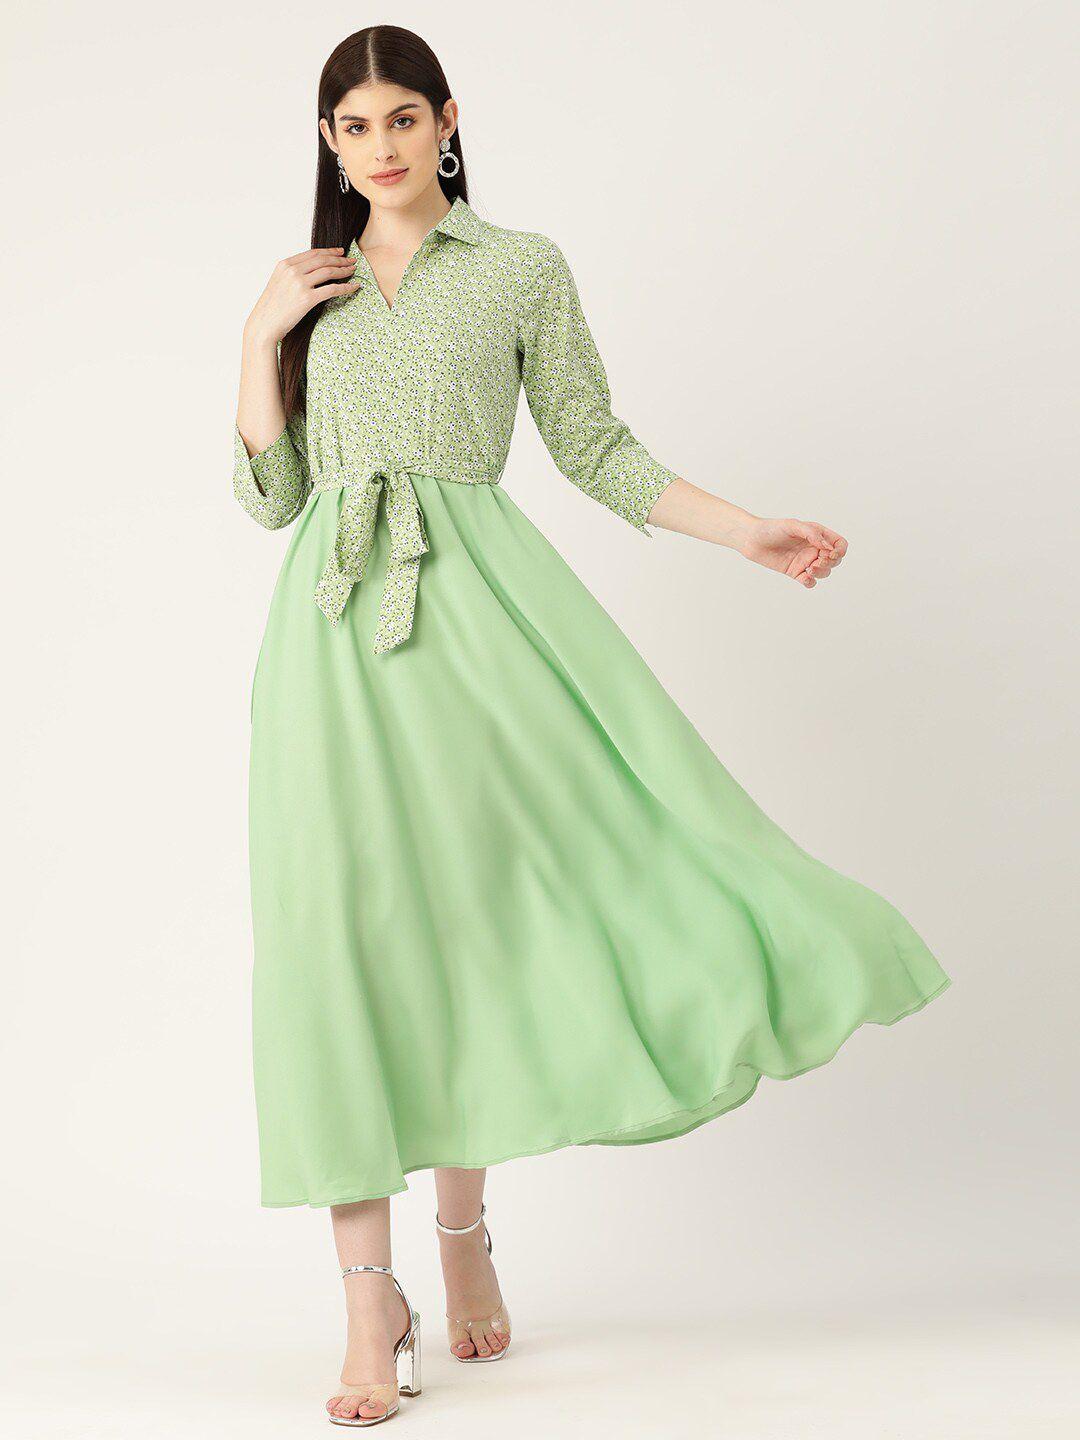 dressberry lime green floral printed belted a-line midi dress